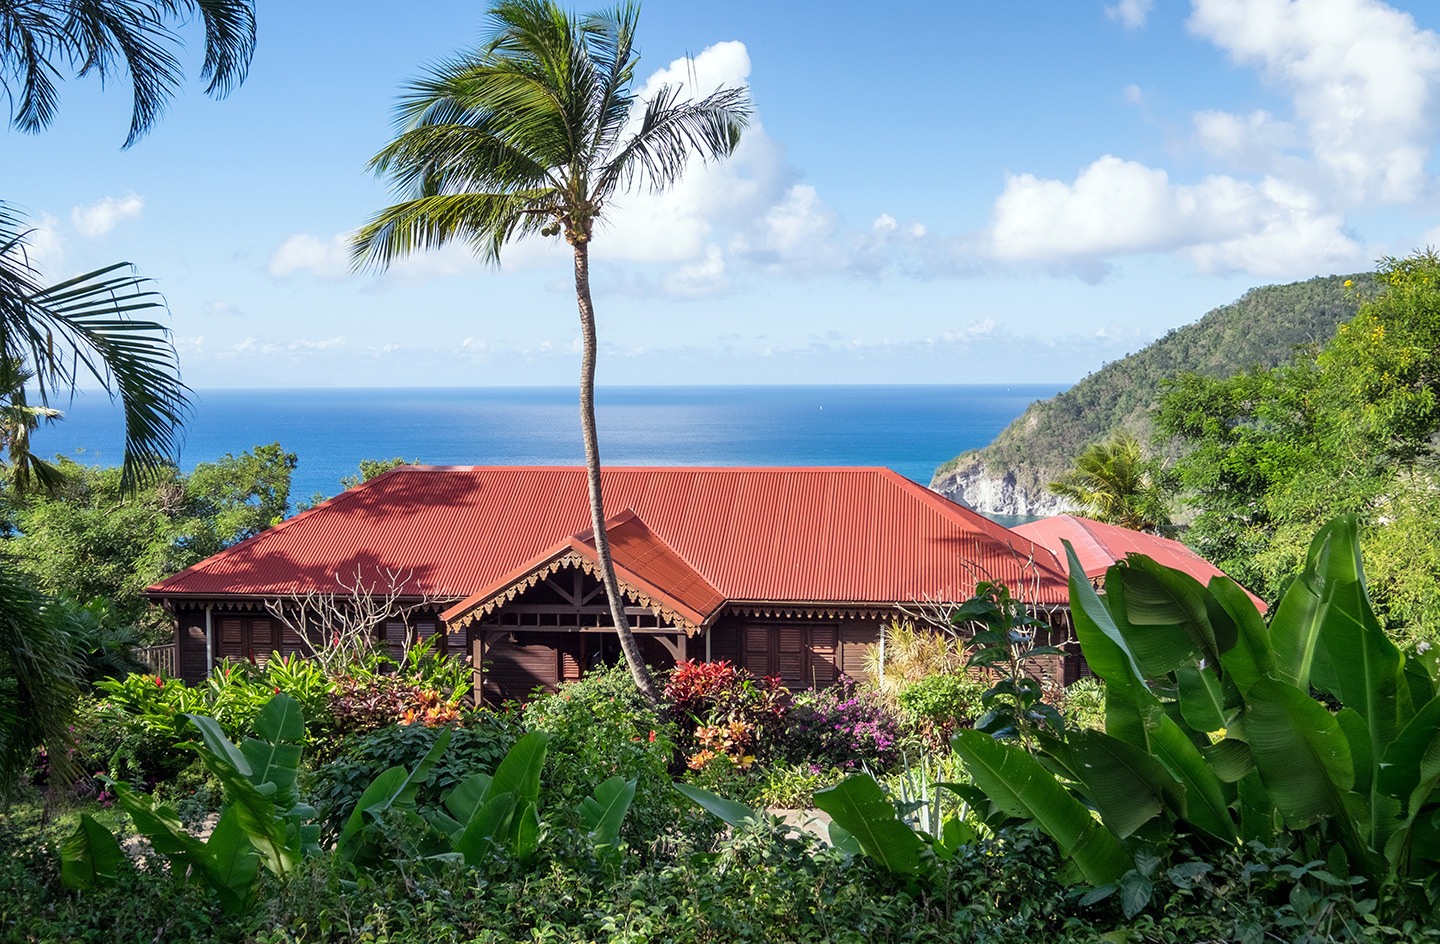 Deshaies' Botanic Gardens, Death in Paradise filming location Guadeloupe